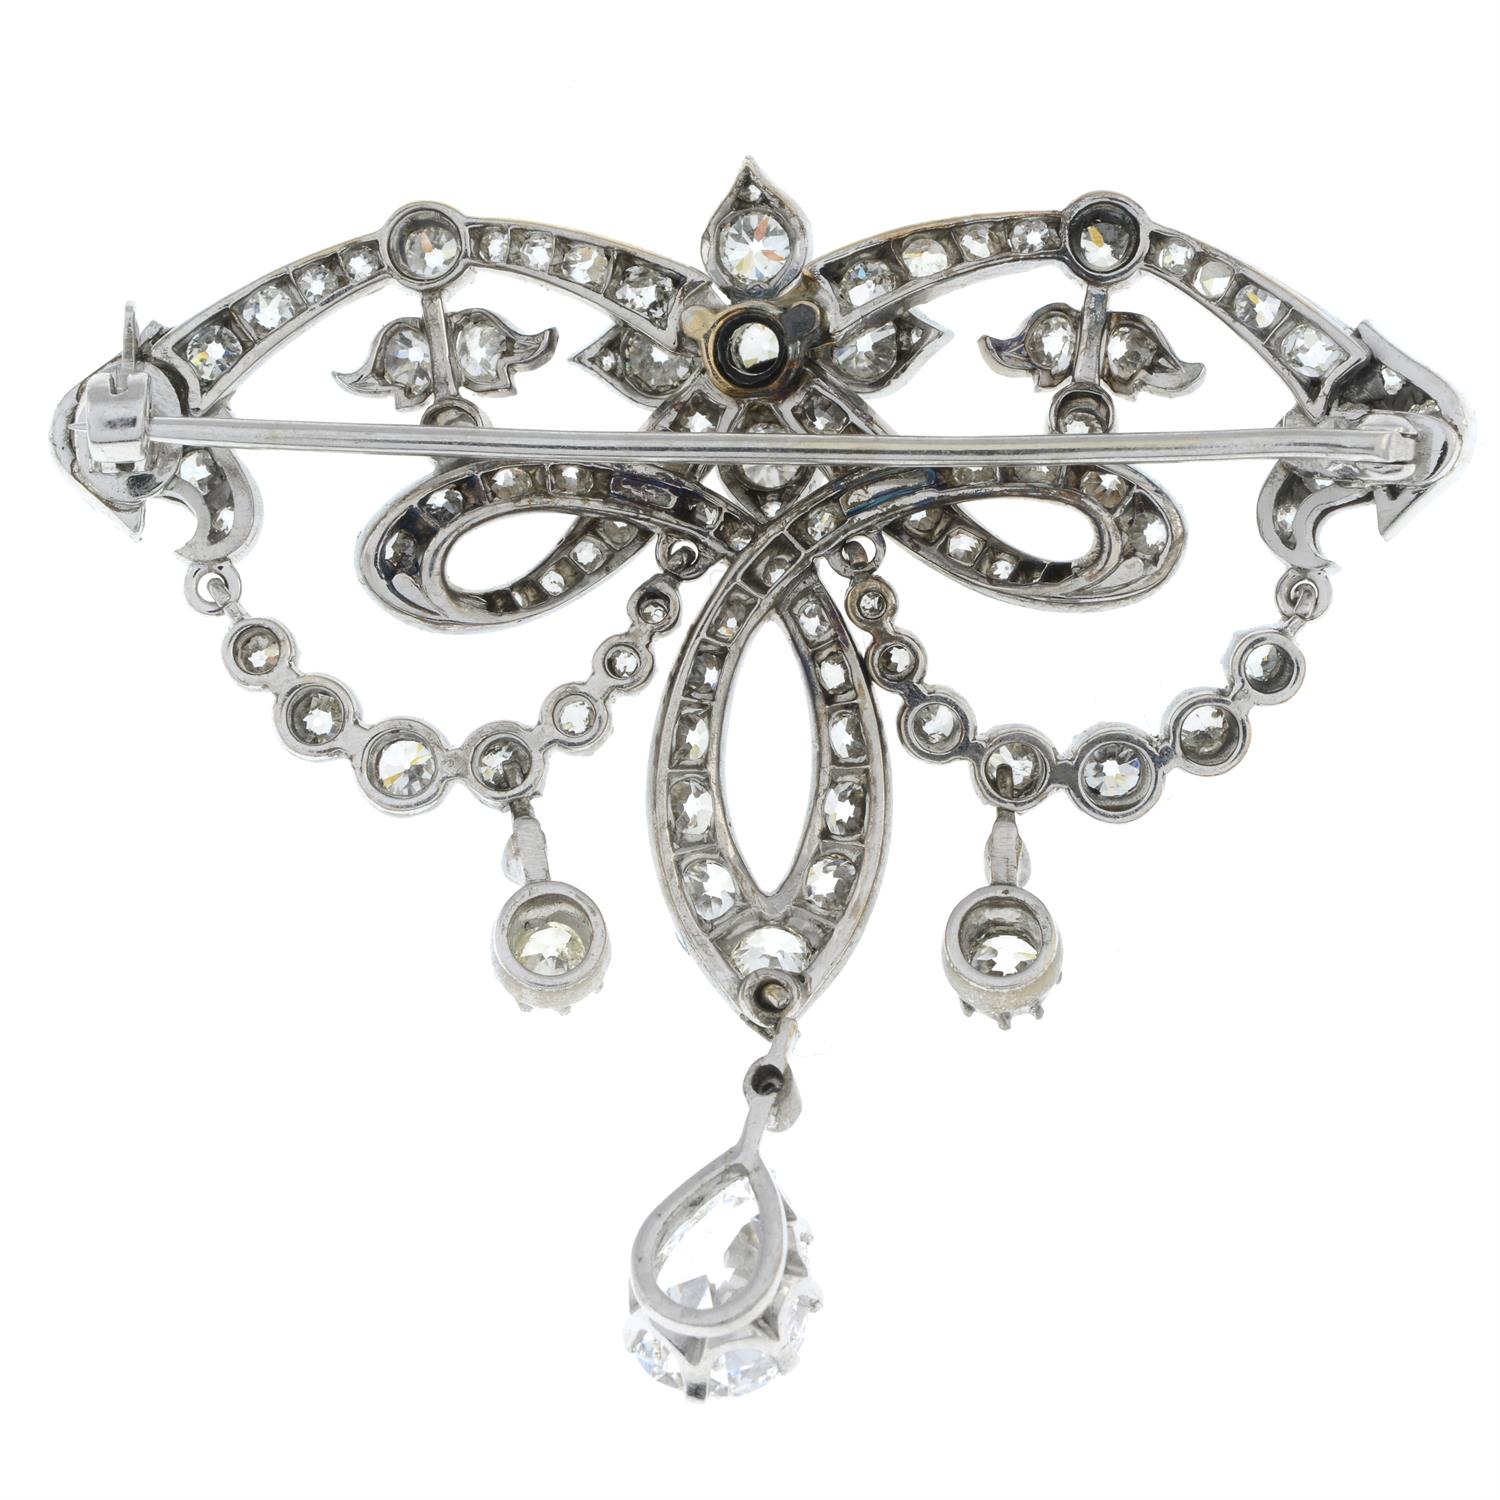 19th century silver and gold diamond brooch - Image 3 of 4